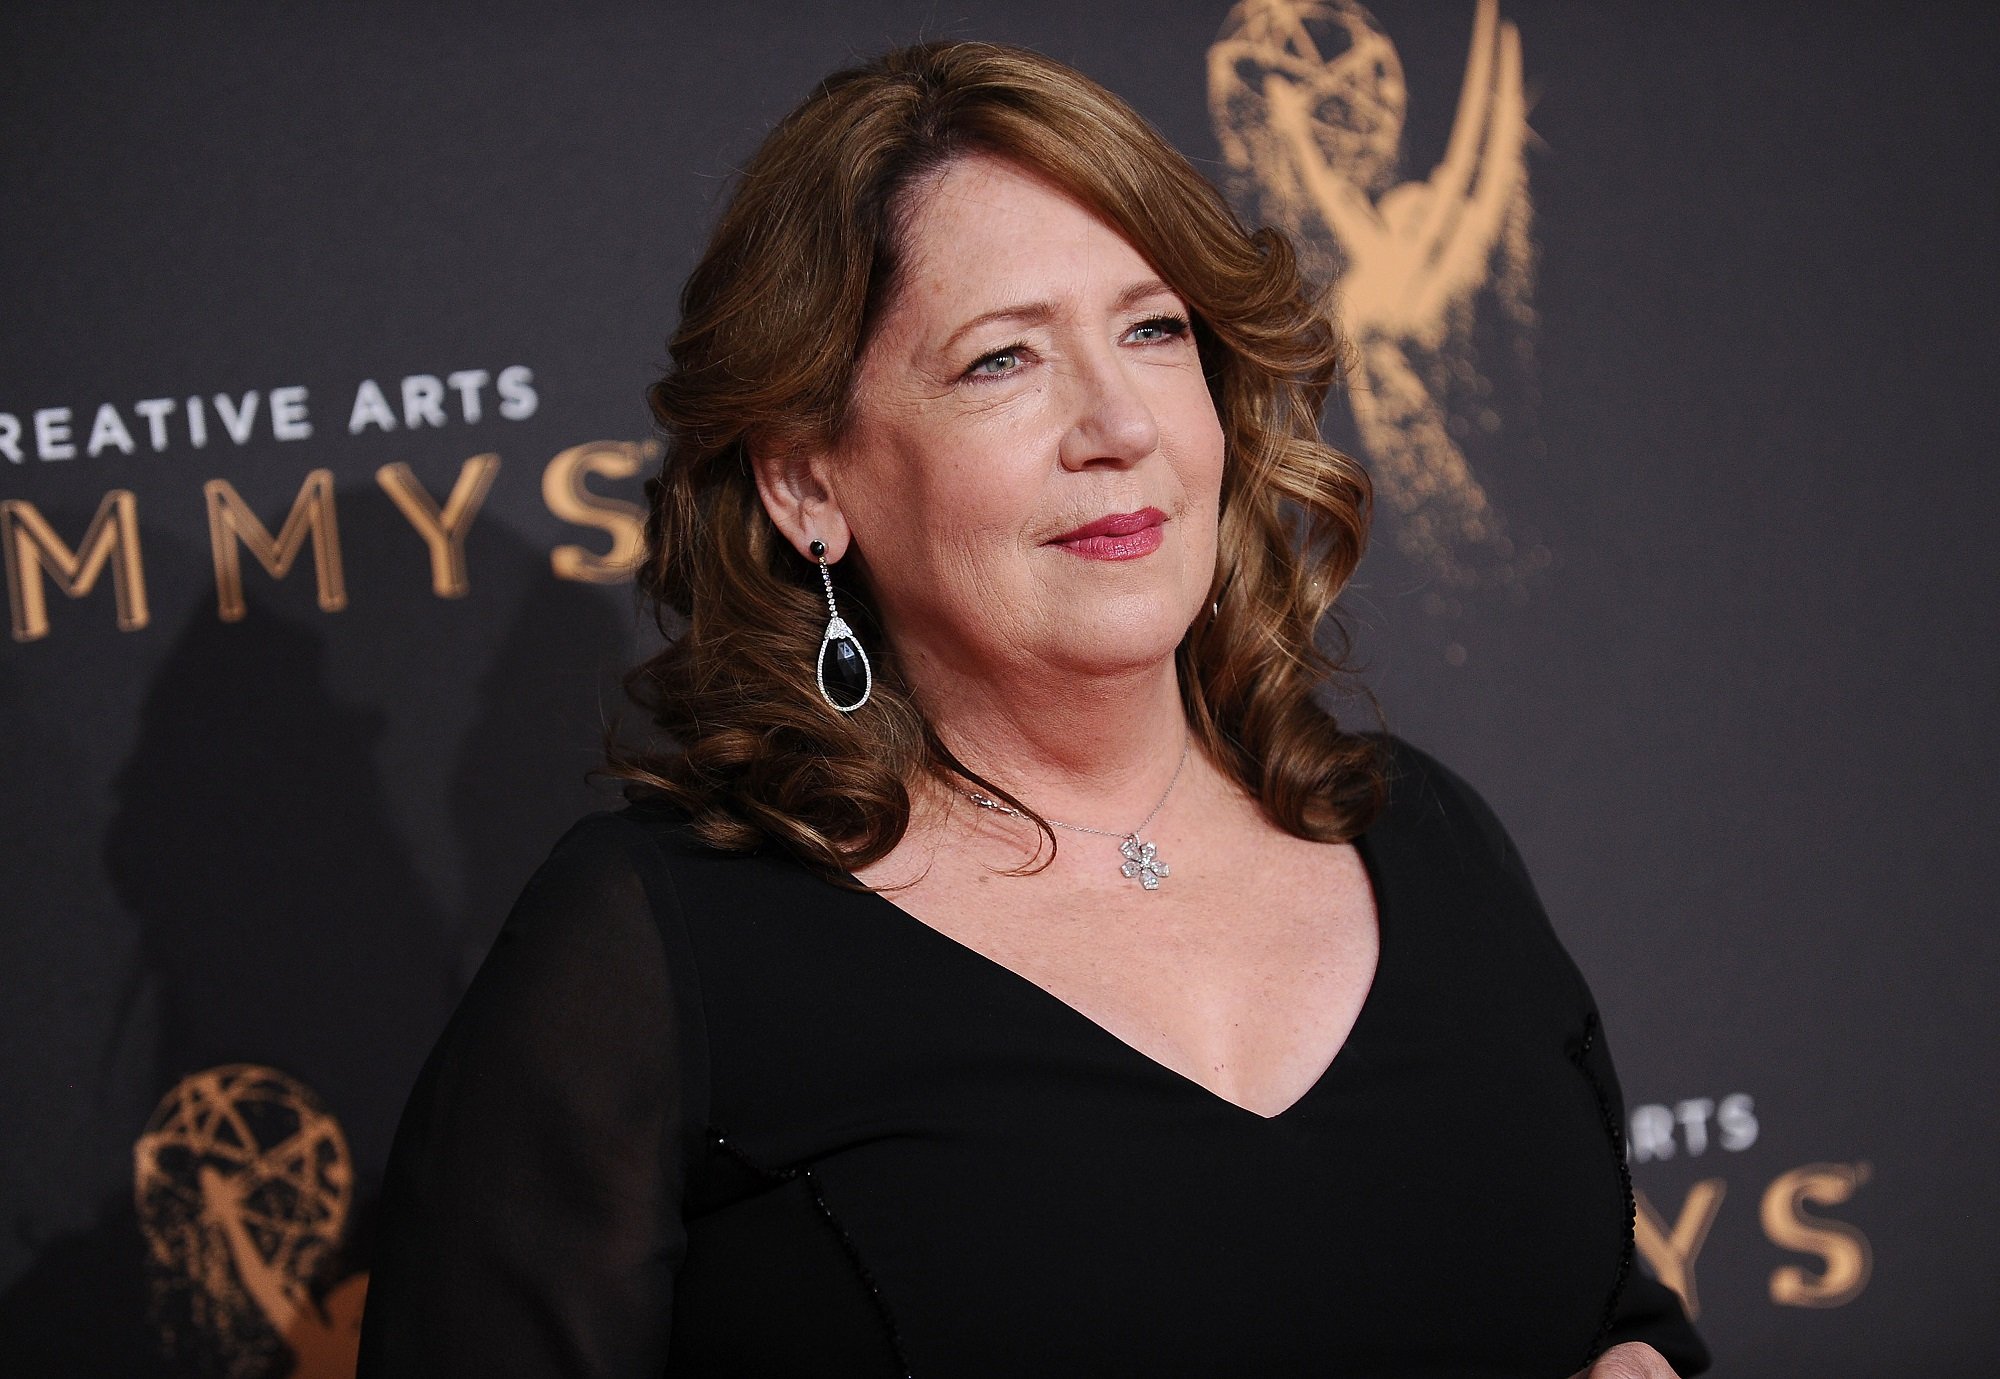 Ann Dowd attending the 2017 Creative Arts Emmy Awards